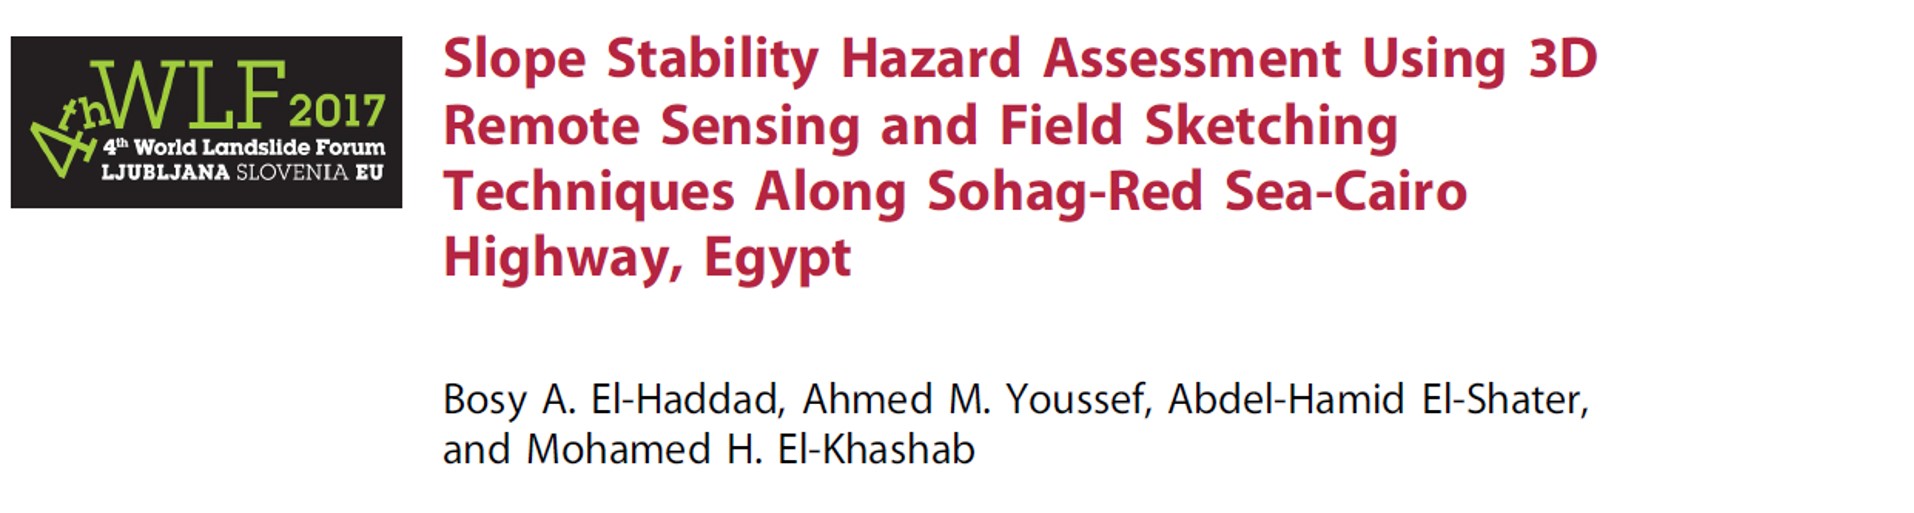 Slope Stability Hazard Assessment Using 3D Remote Sensing and Field Sketching Techniques Along Sohag-Red Sea-Cairo Highway, Egypt